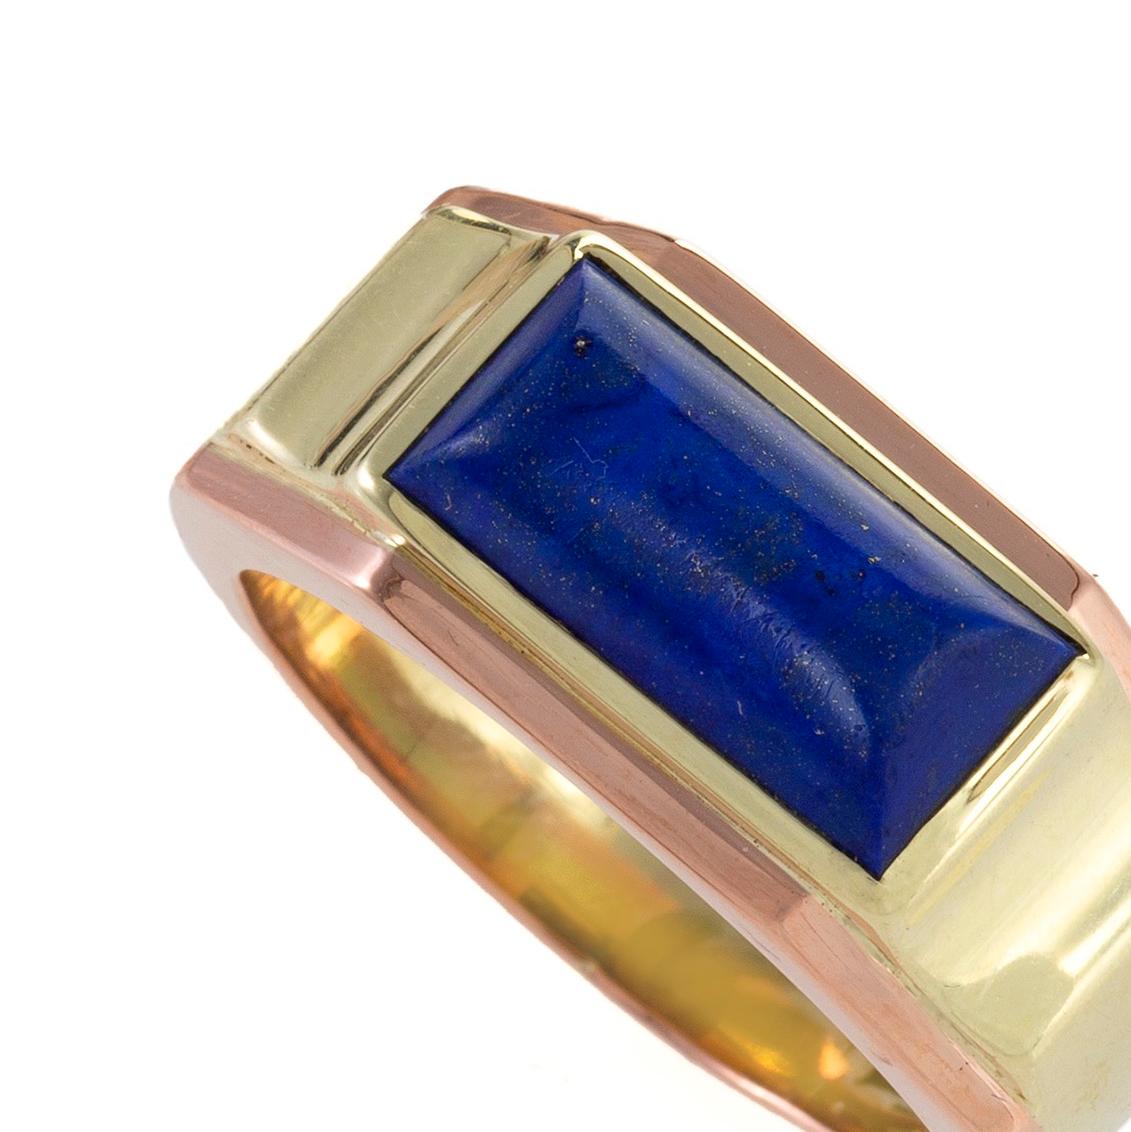 Sugarloaf Cabochon J.R. Wood & Sons Lapis Cabochon Ring For Sale